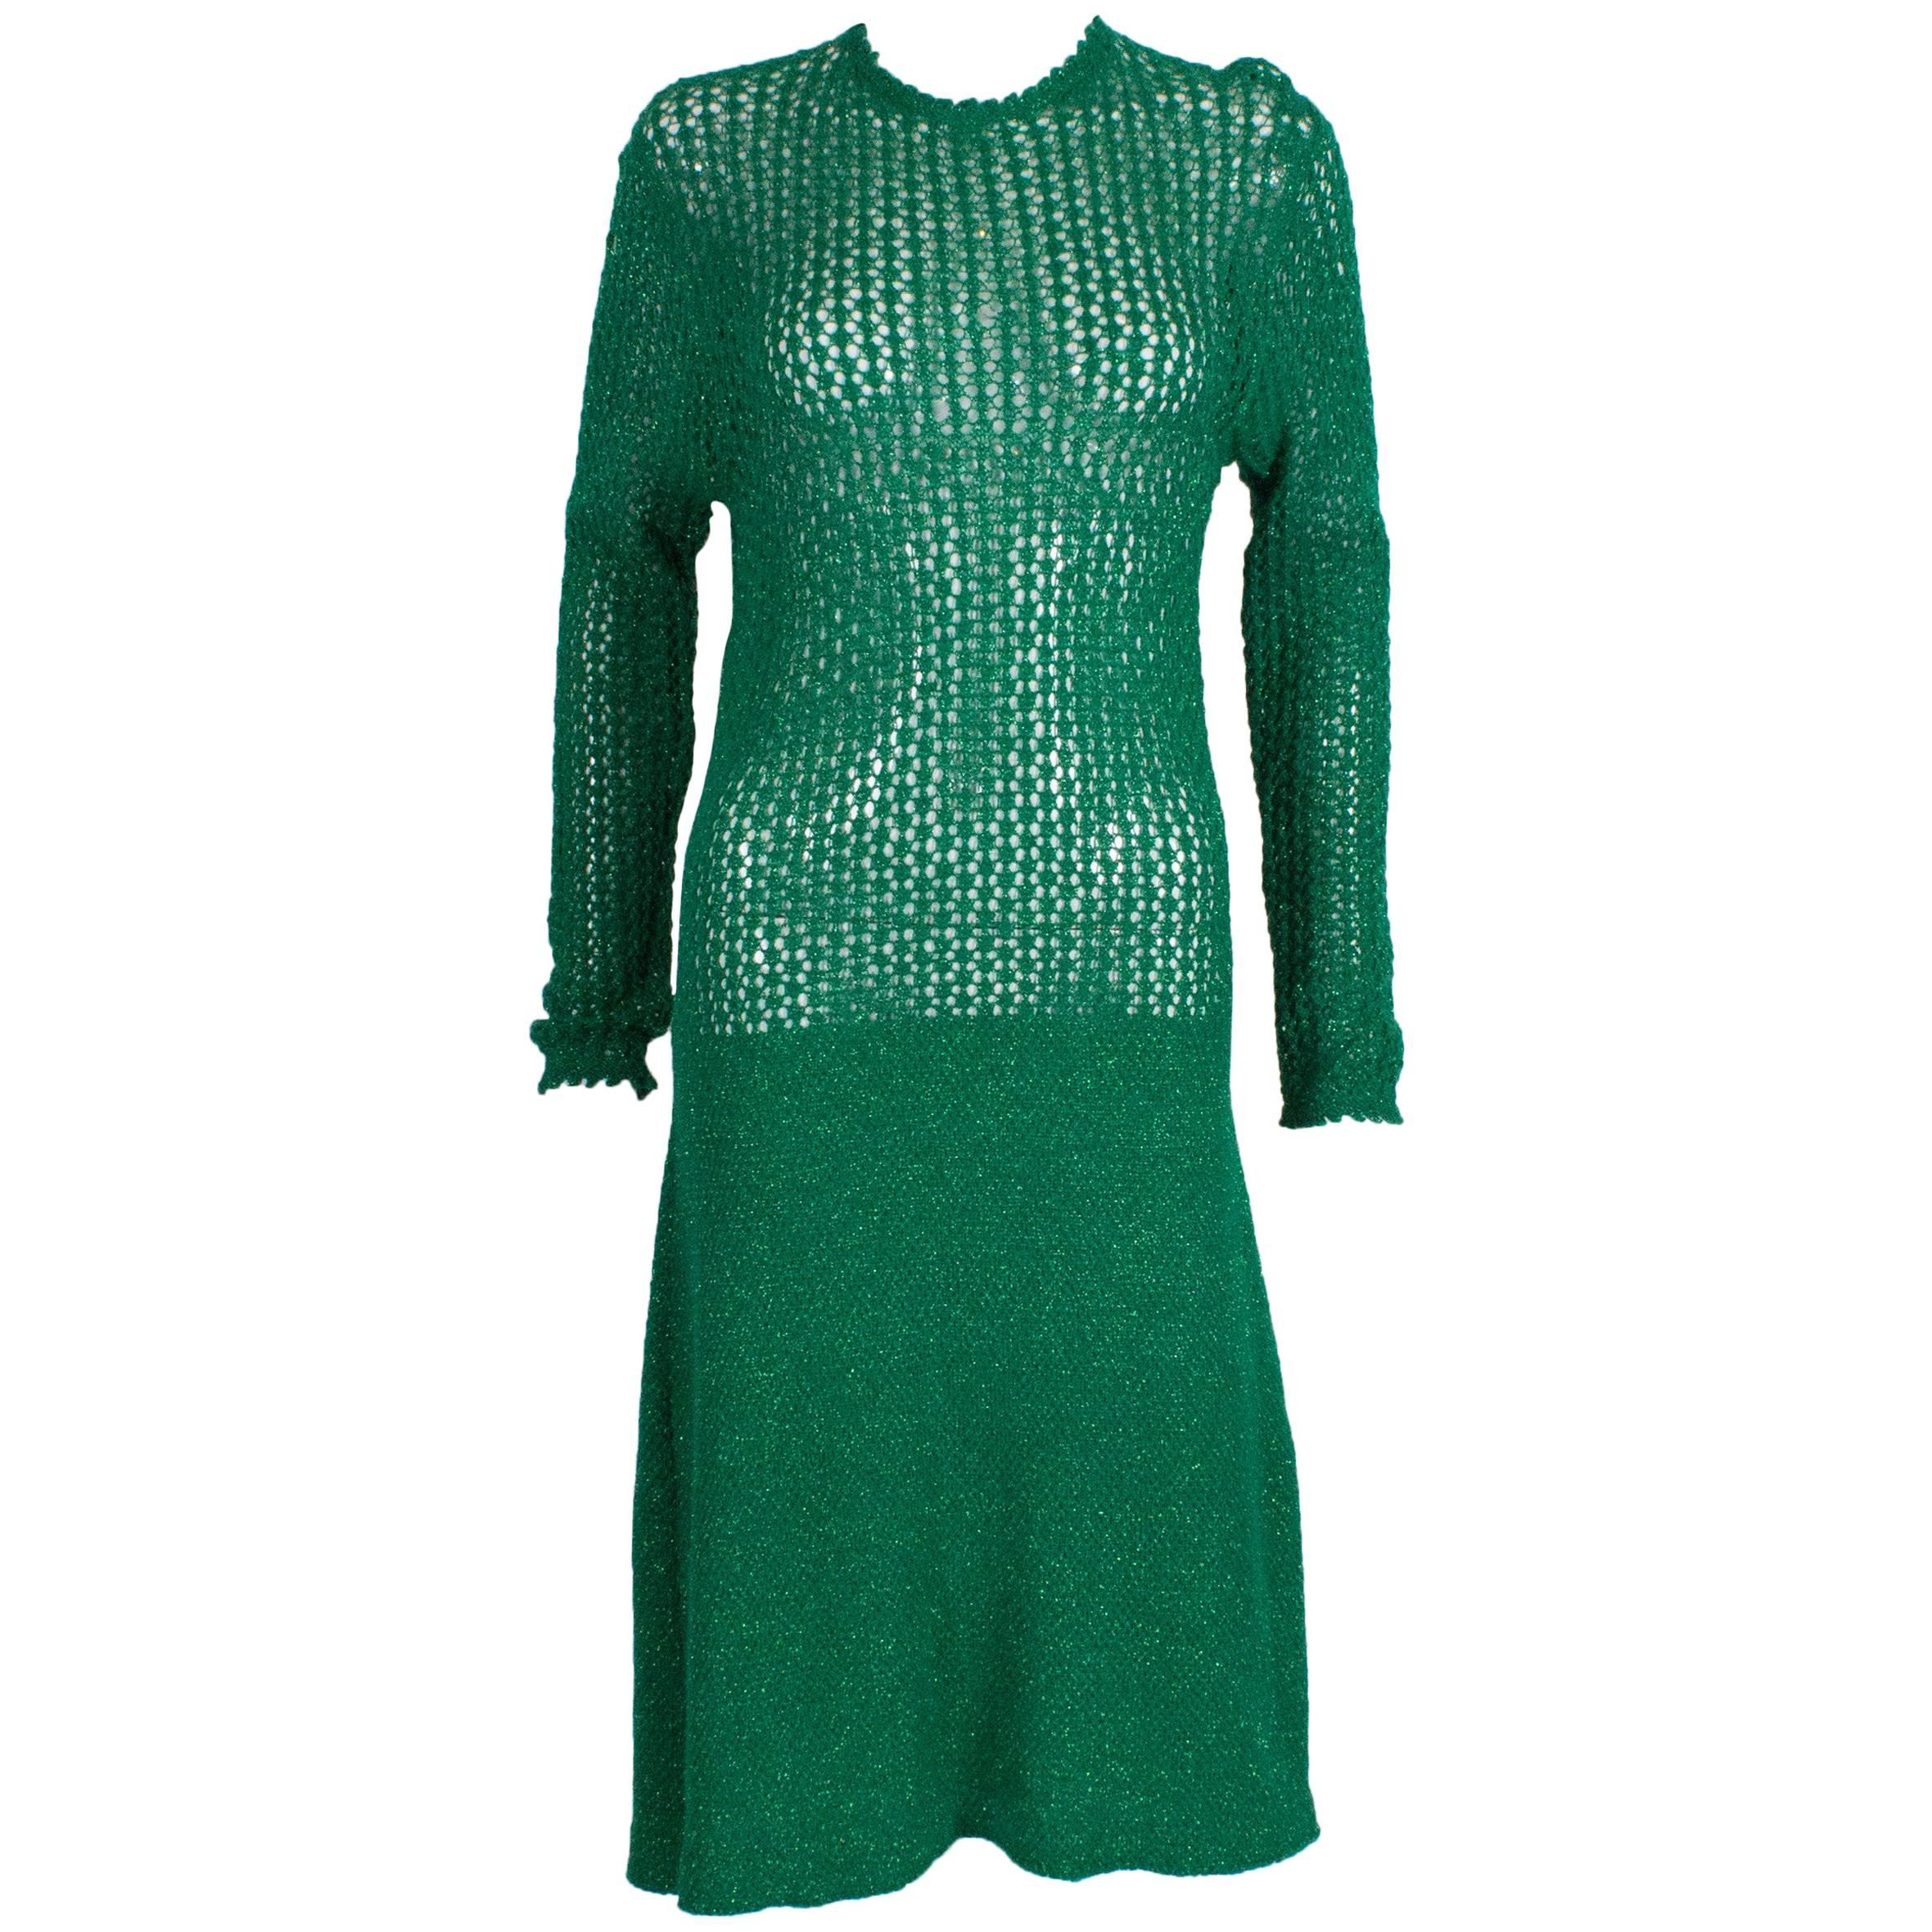 A Sparkly Green Knitted Crochet Dress